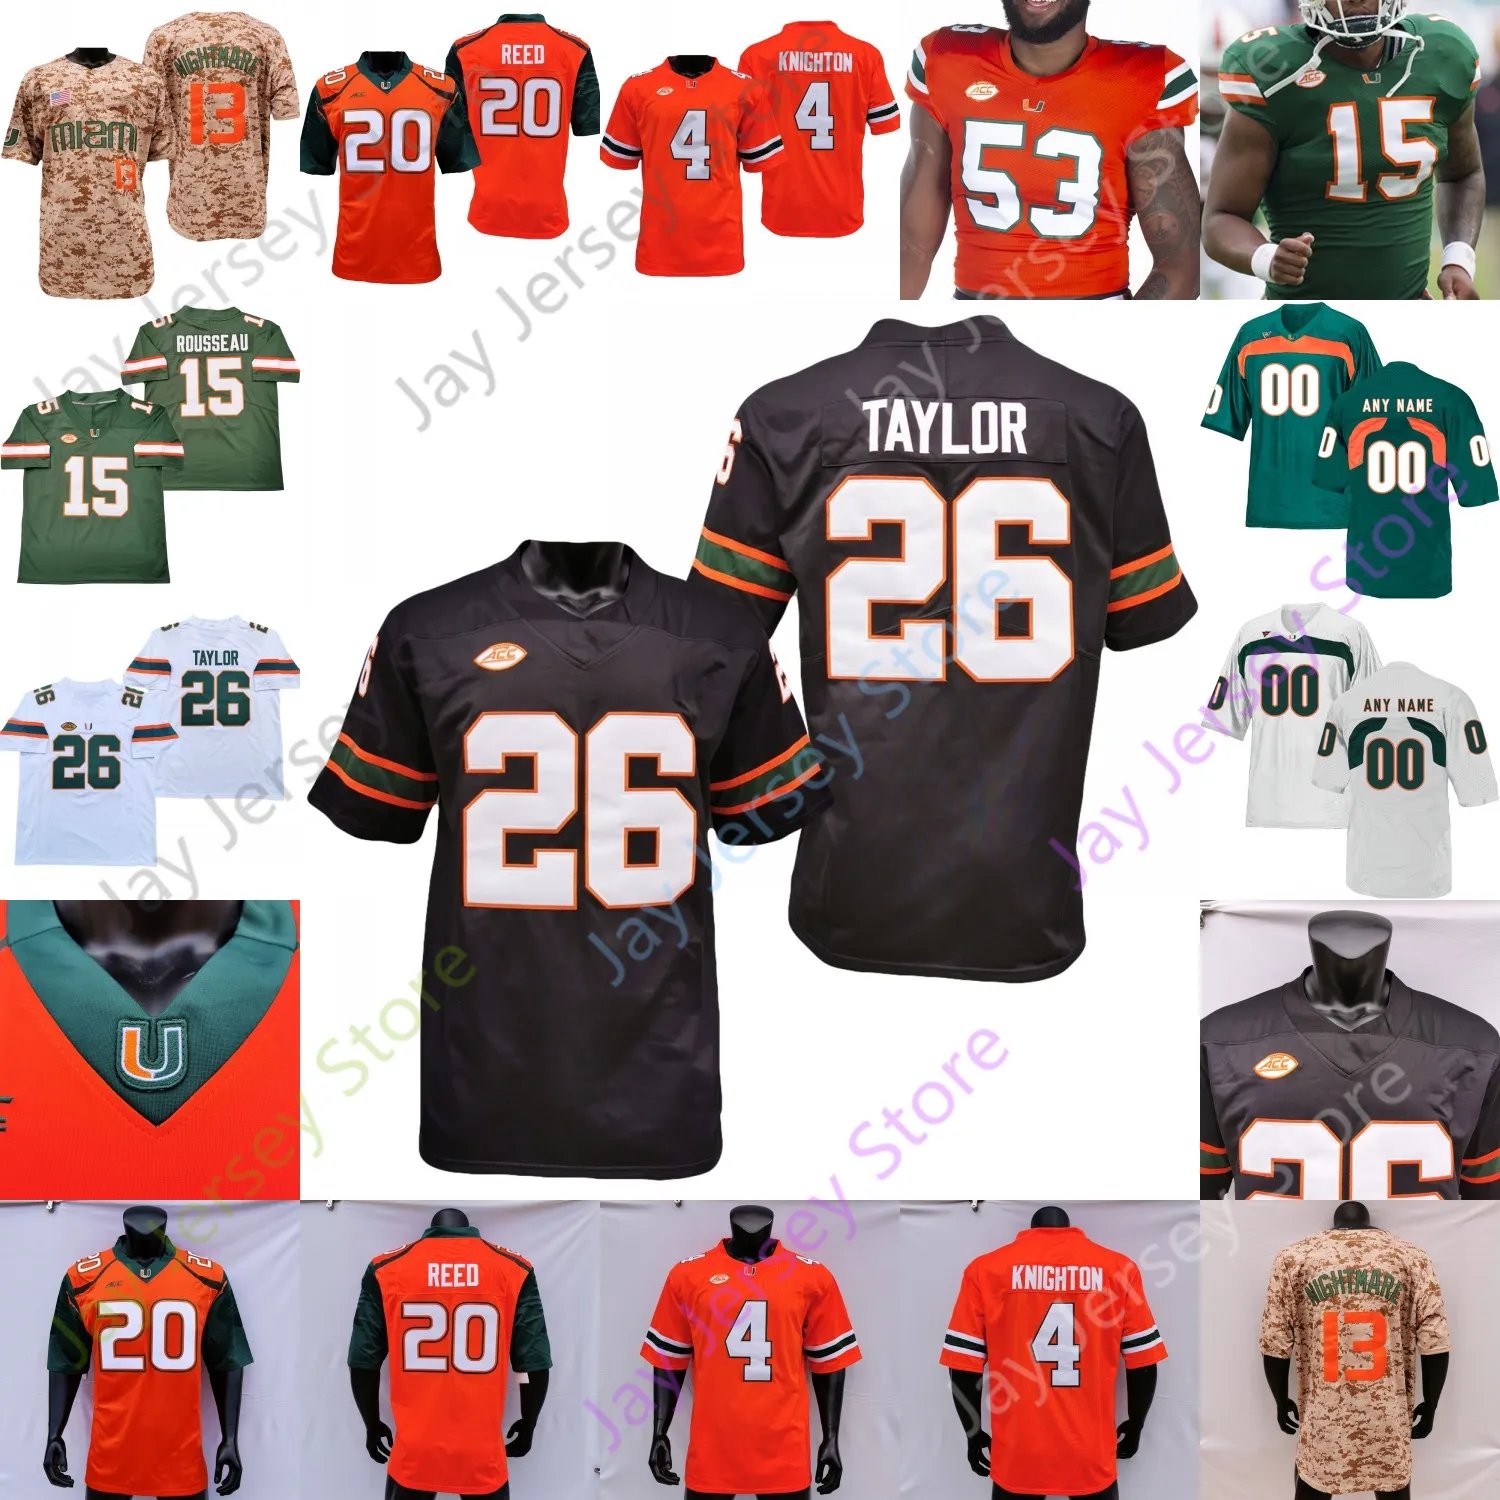 Miami Hurricanes Football Jersey NCAA College Tyler Van Dyke Henry Parrish Jr. Mark Fletcher Sean Taylor Mauigoa Young Restrepo Allen Chaney Jr. Jacolby George George